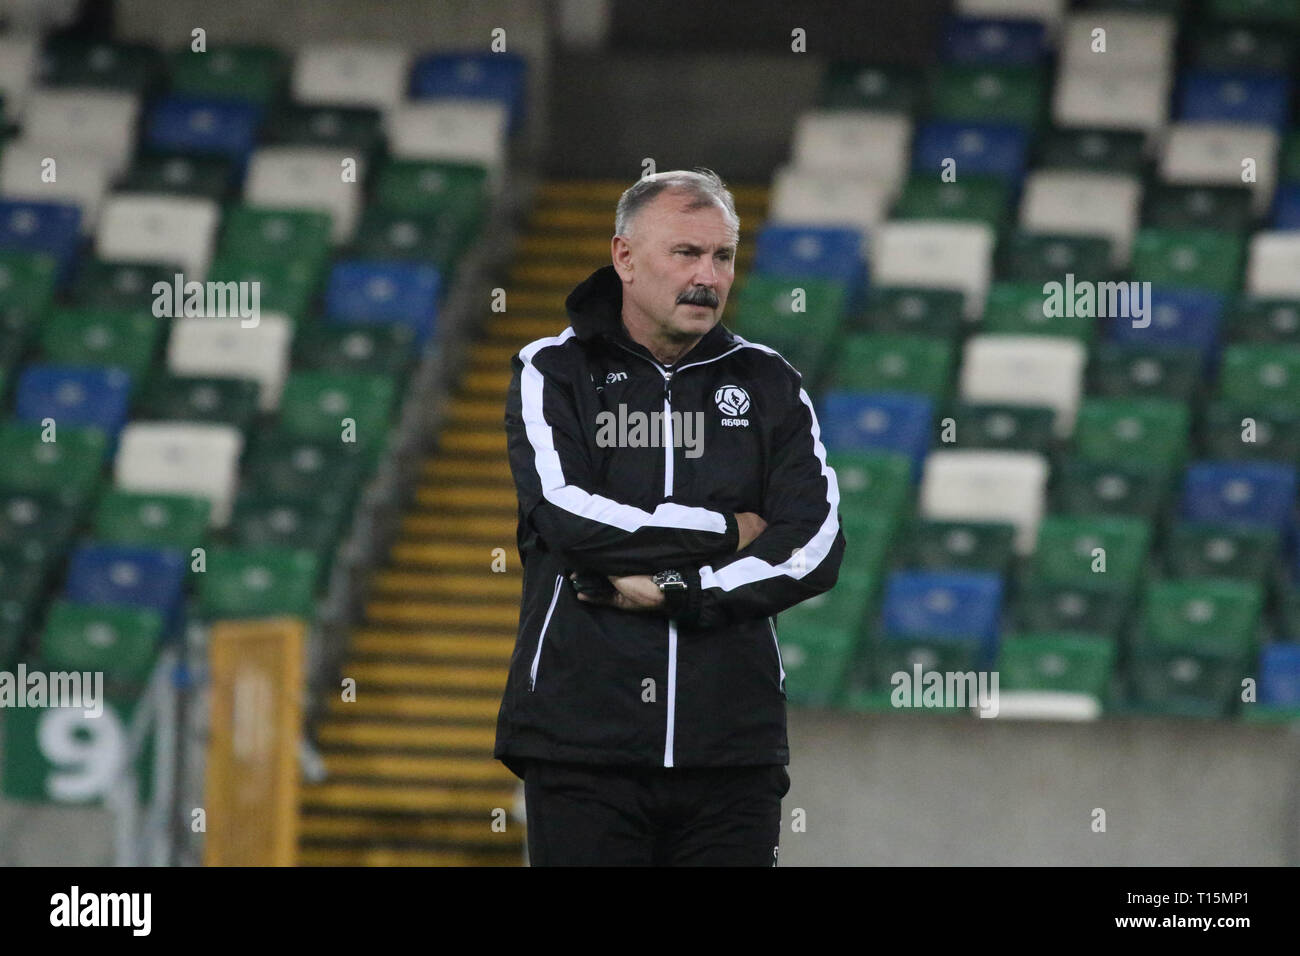 Windsor Park Belfast, Northern Ireland, UK. 23 March 2019. The Belarus squad train at Windsor Park before their game against Northern Ireland tomorrow night. Credit: David Hunter/Alamy Live News. Stock Photo